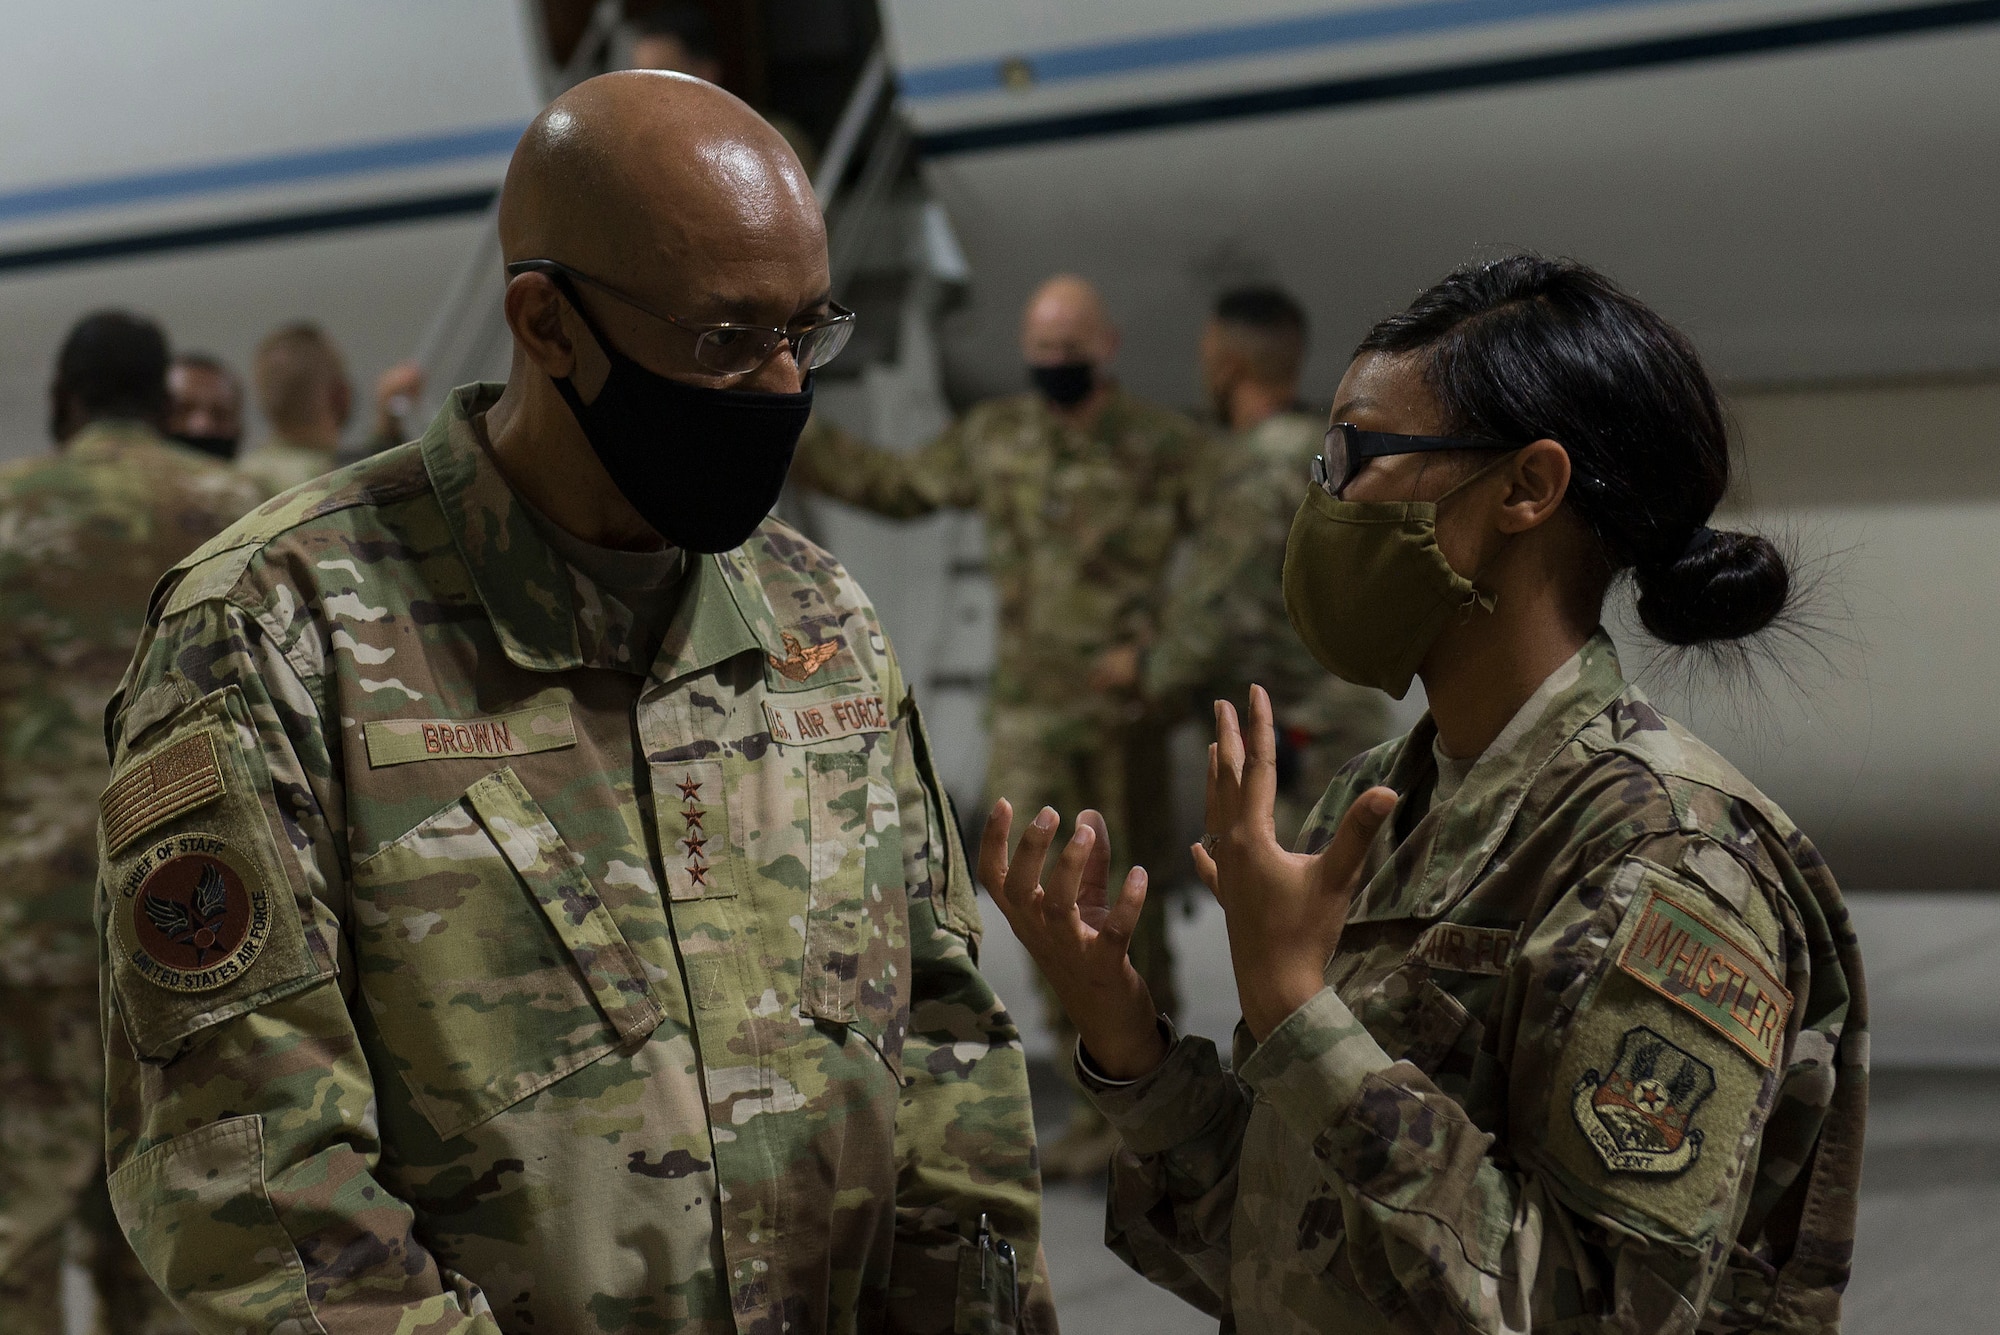 Chief of Staff of the Air Force Gen. Charles Q. Brown, Jr. speaks with an Airman assigned to the 380th Air Expeditionary Wing (AEW) during a visit to Al Dhafra Air Base, United Arab Emirates, Dec. 21, 2020.